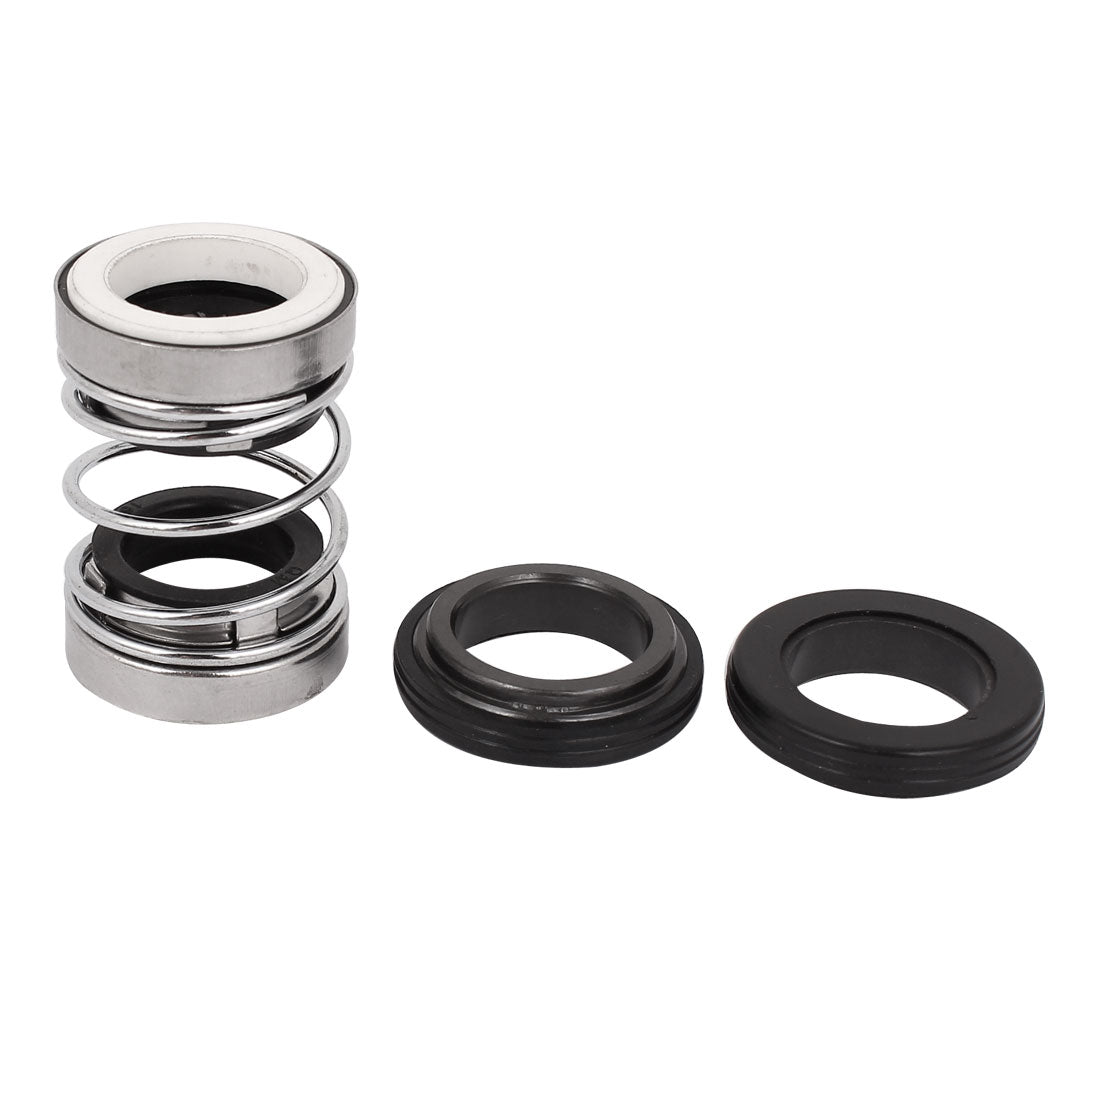 uxcell Uxcell 2pcs 16mm Dia Ceramic Ring Sealing Shaft Mechanical Seal for Water Pump